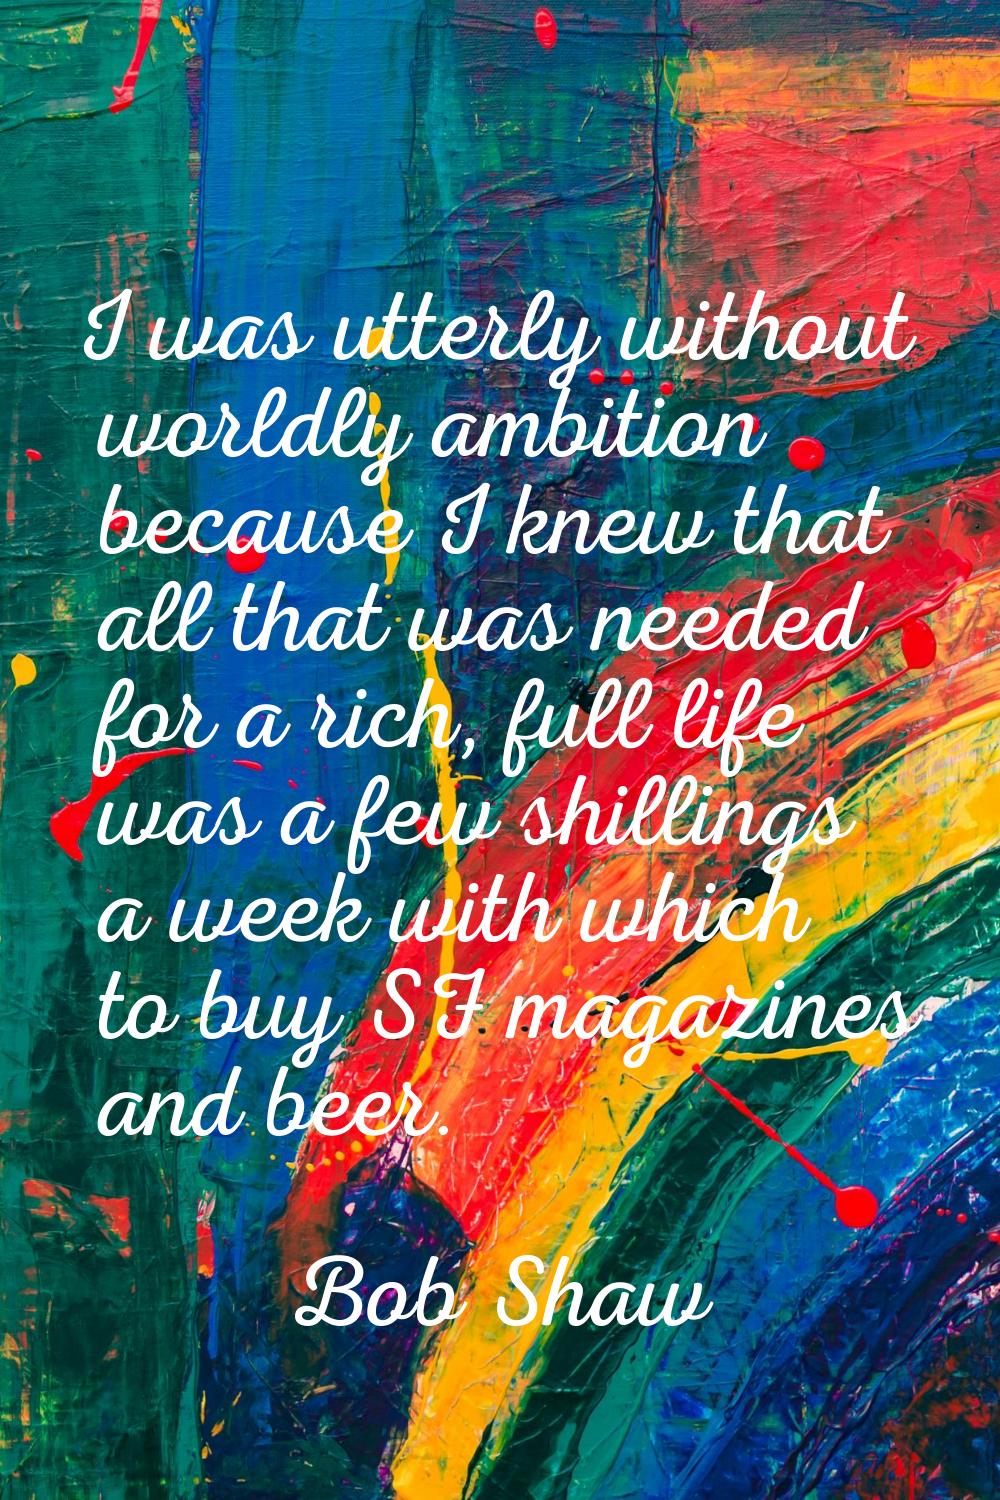 I was utterly without worldly ambition because I knew that all that was needed for a rich, full lif